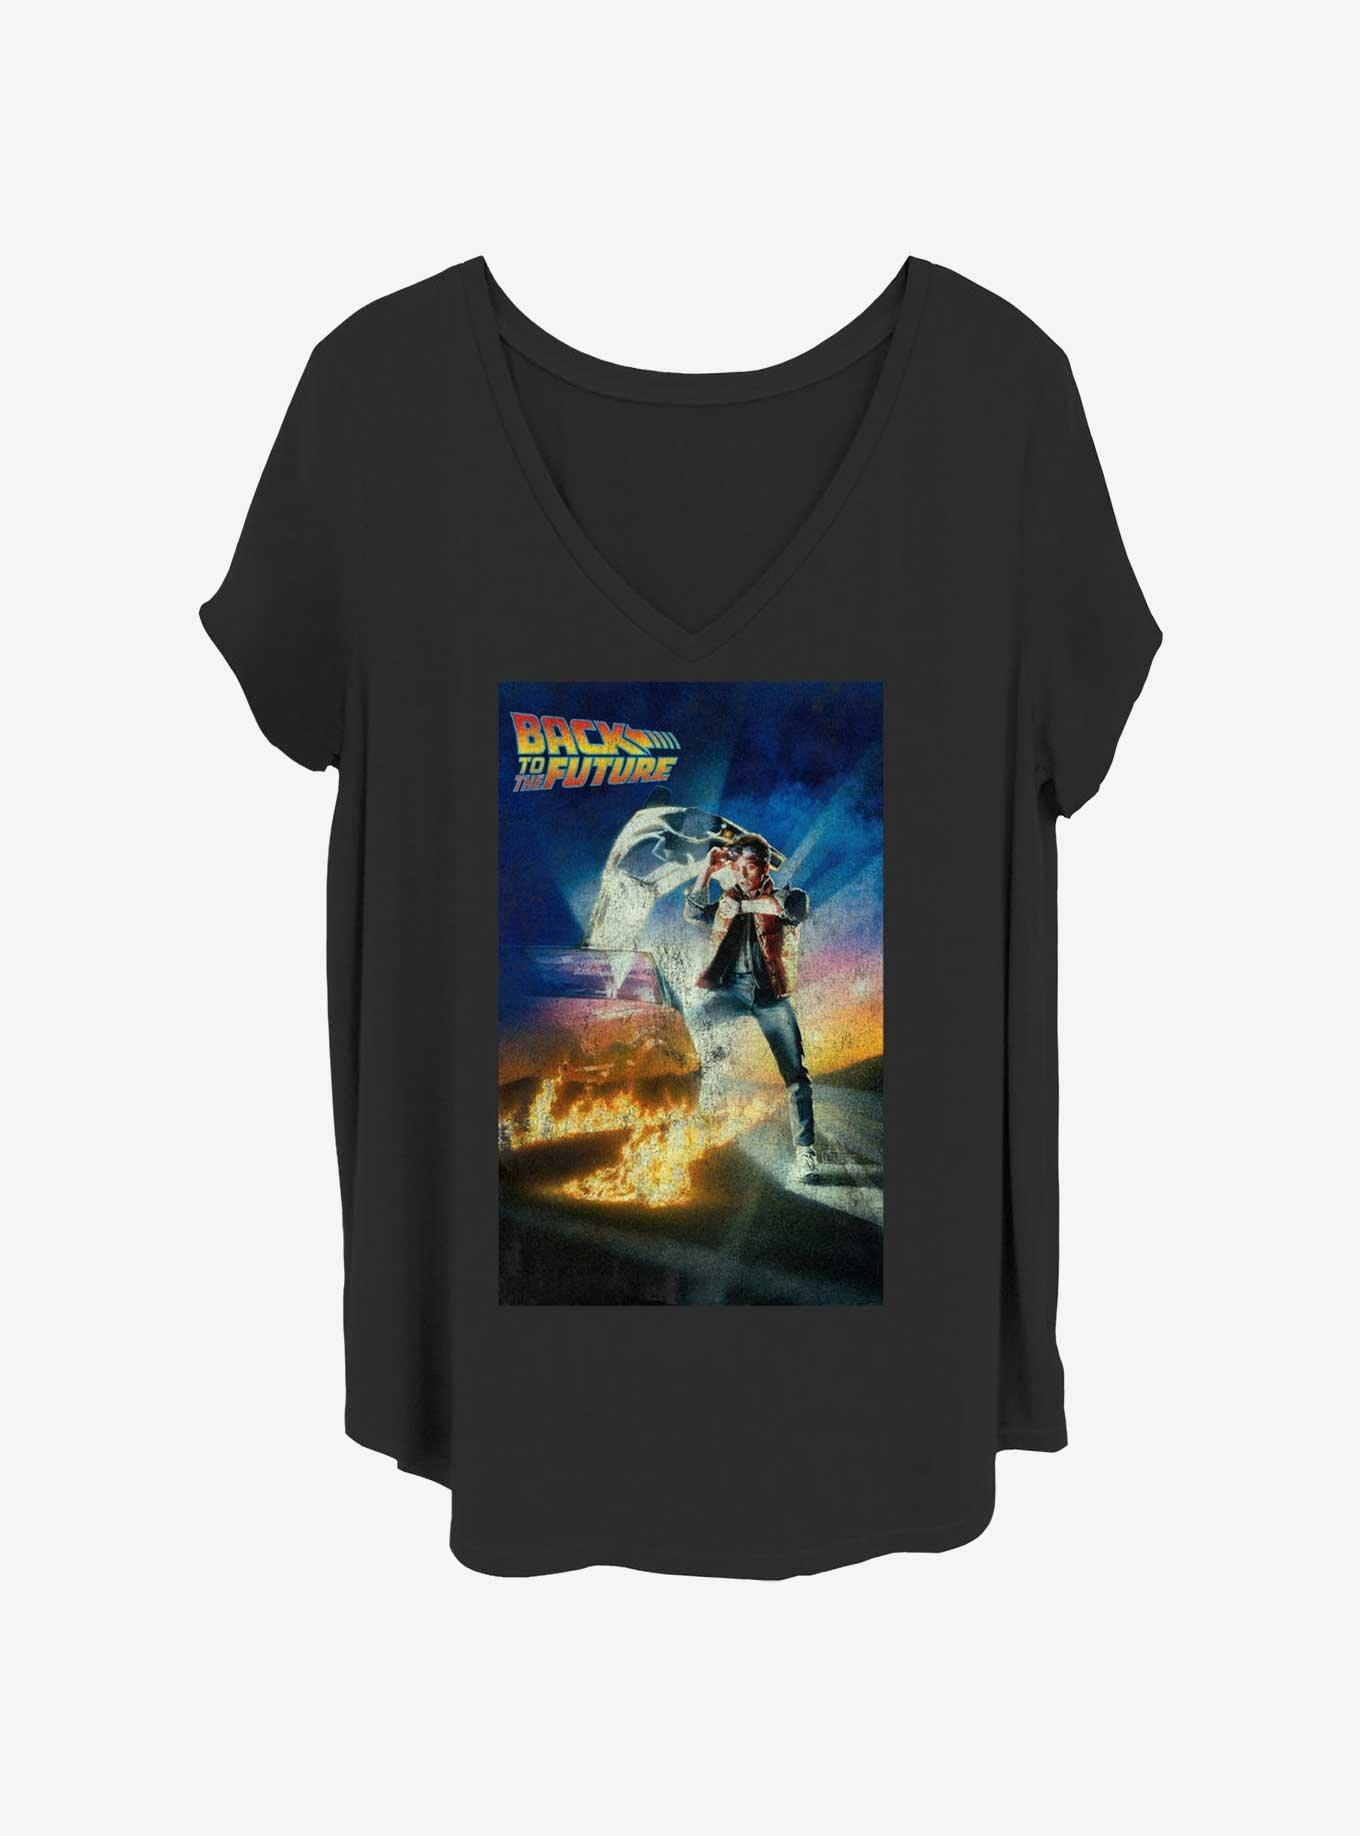 Back to the Future Classic Poster Girls T-Shirt Plus Size, BLACK, hi-res